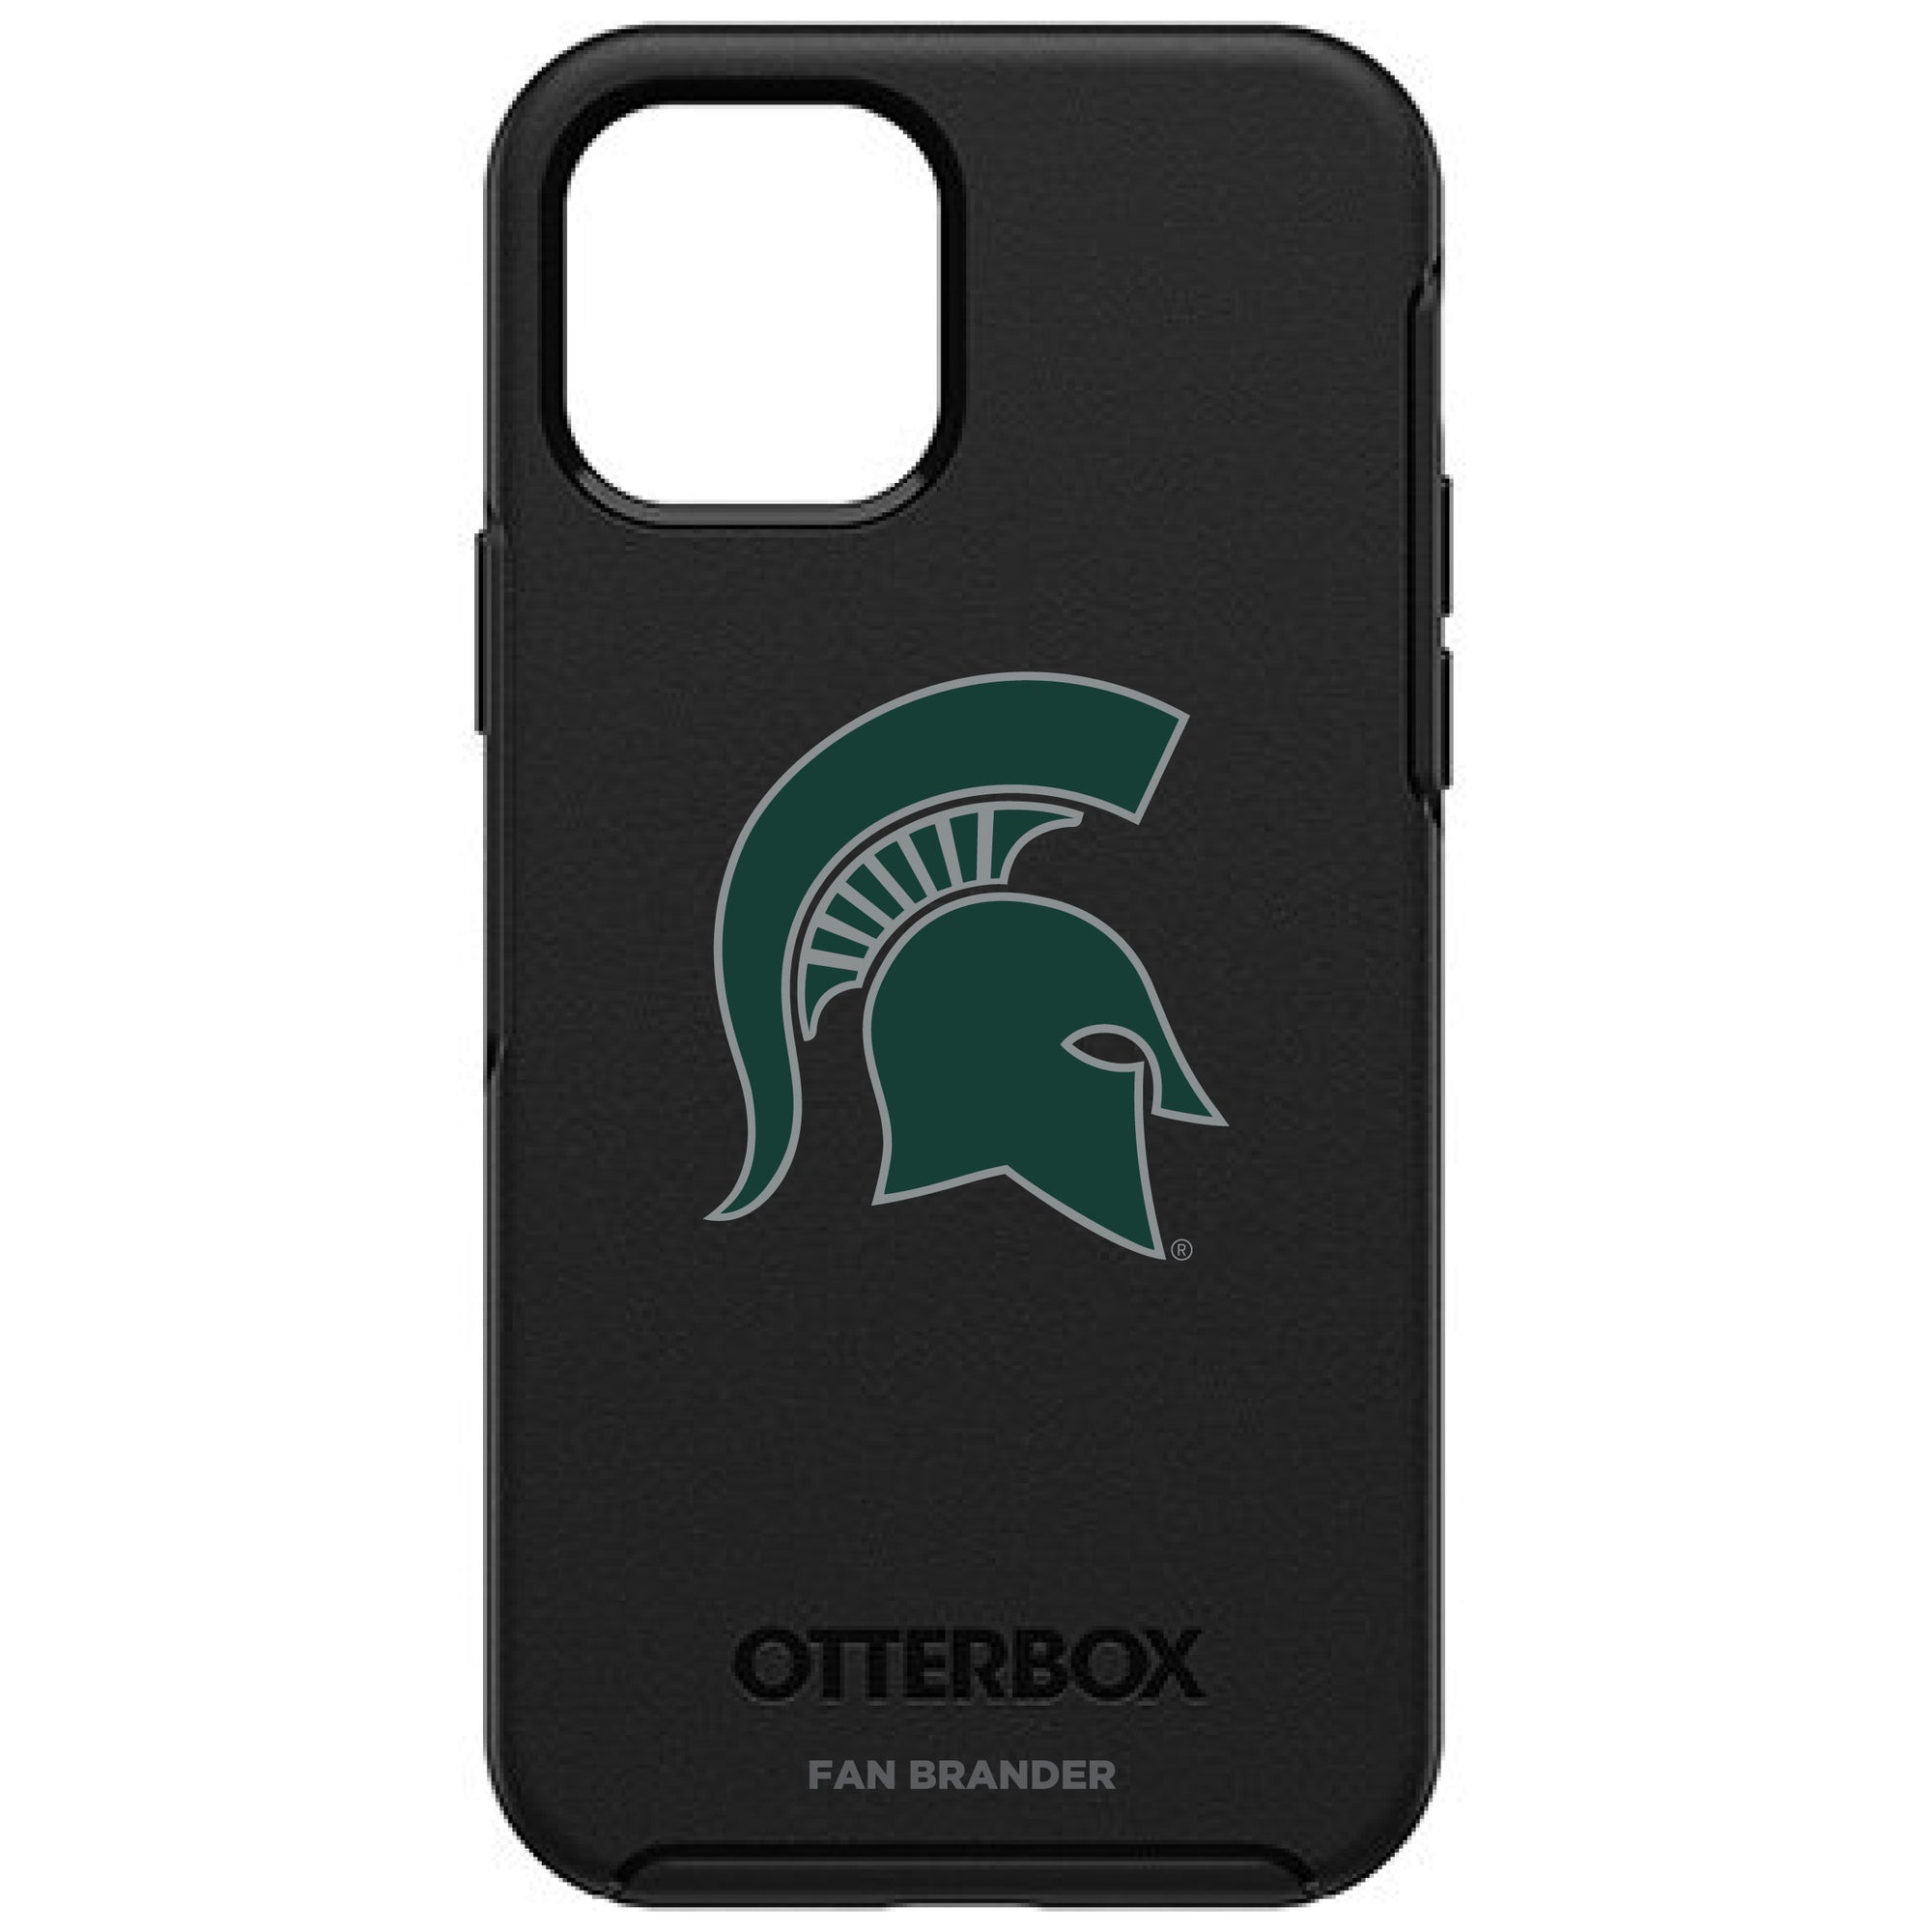 Michigan State Spartans Otterbox iPhone 12 Pro Max Symmetry Case